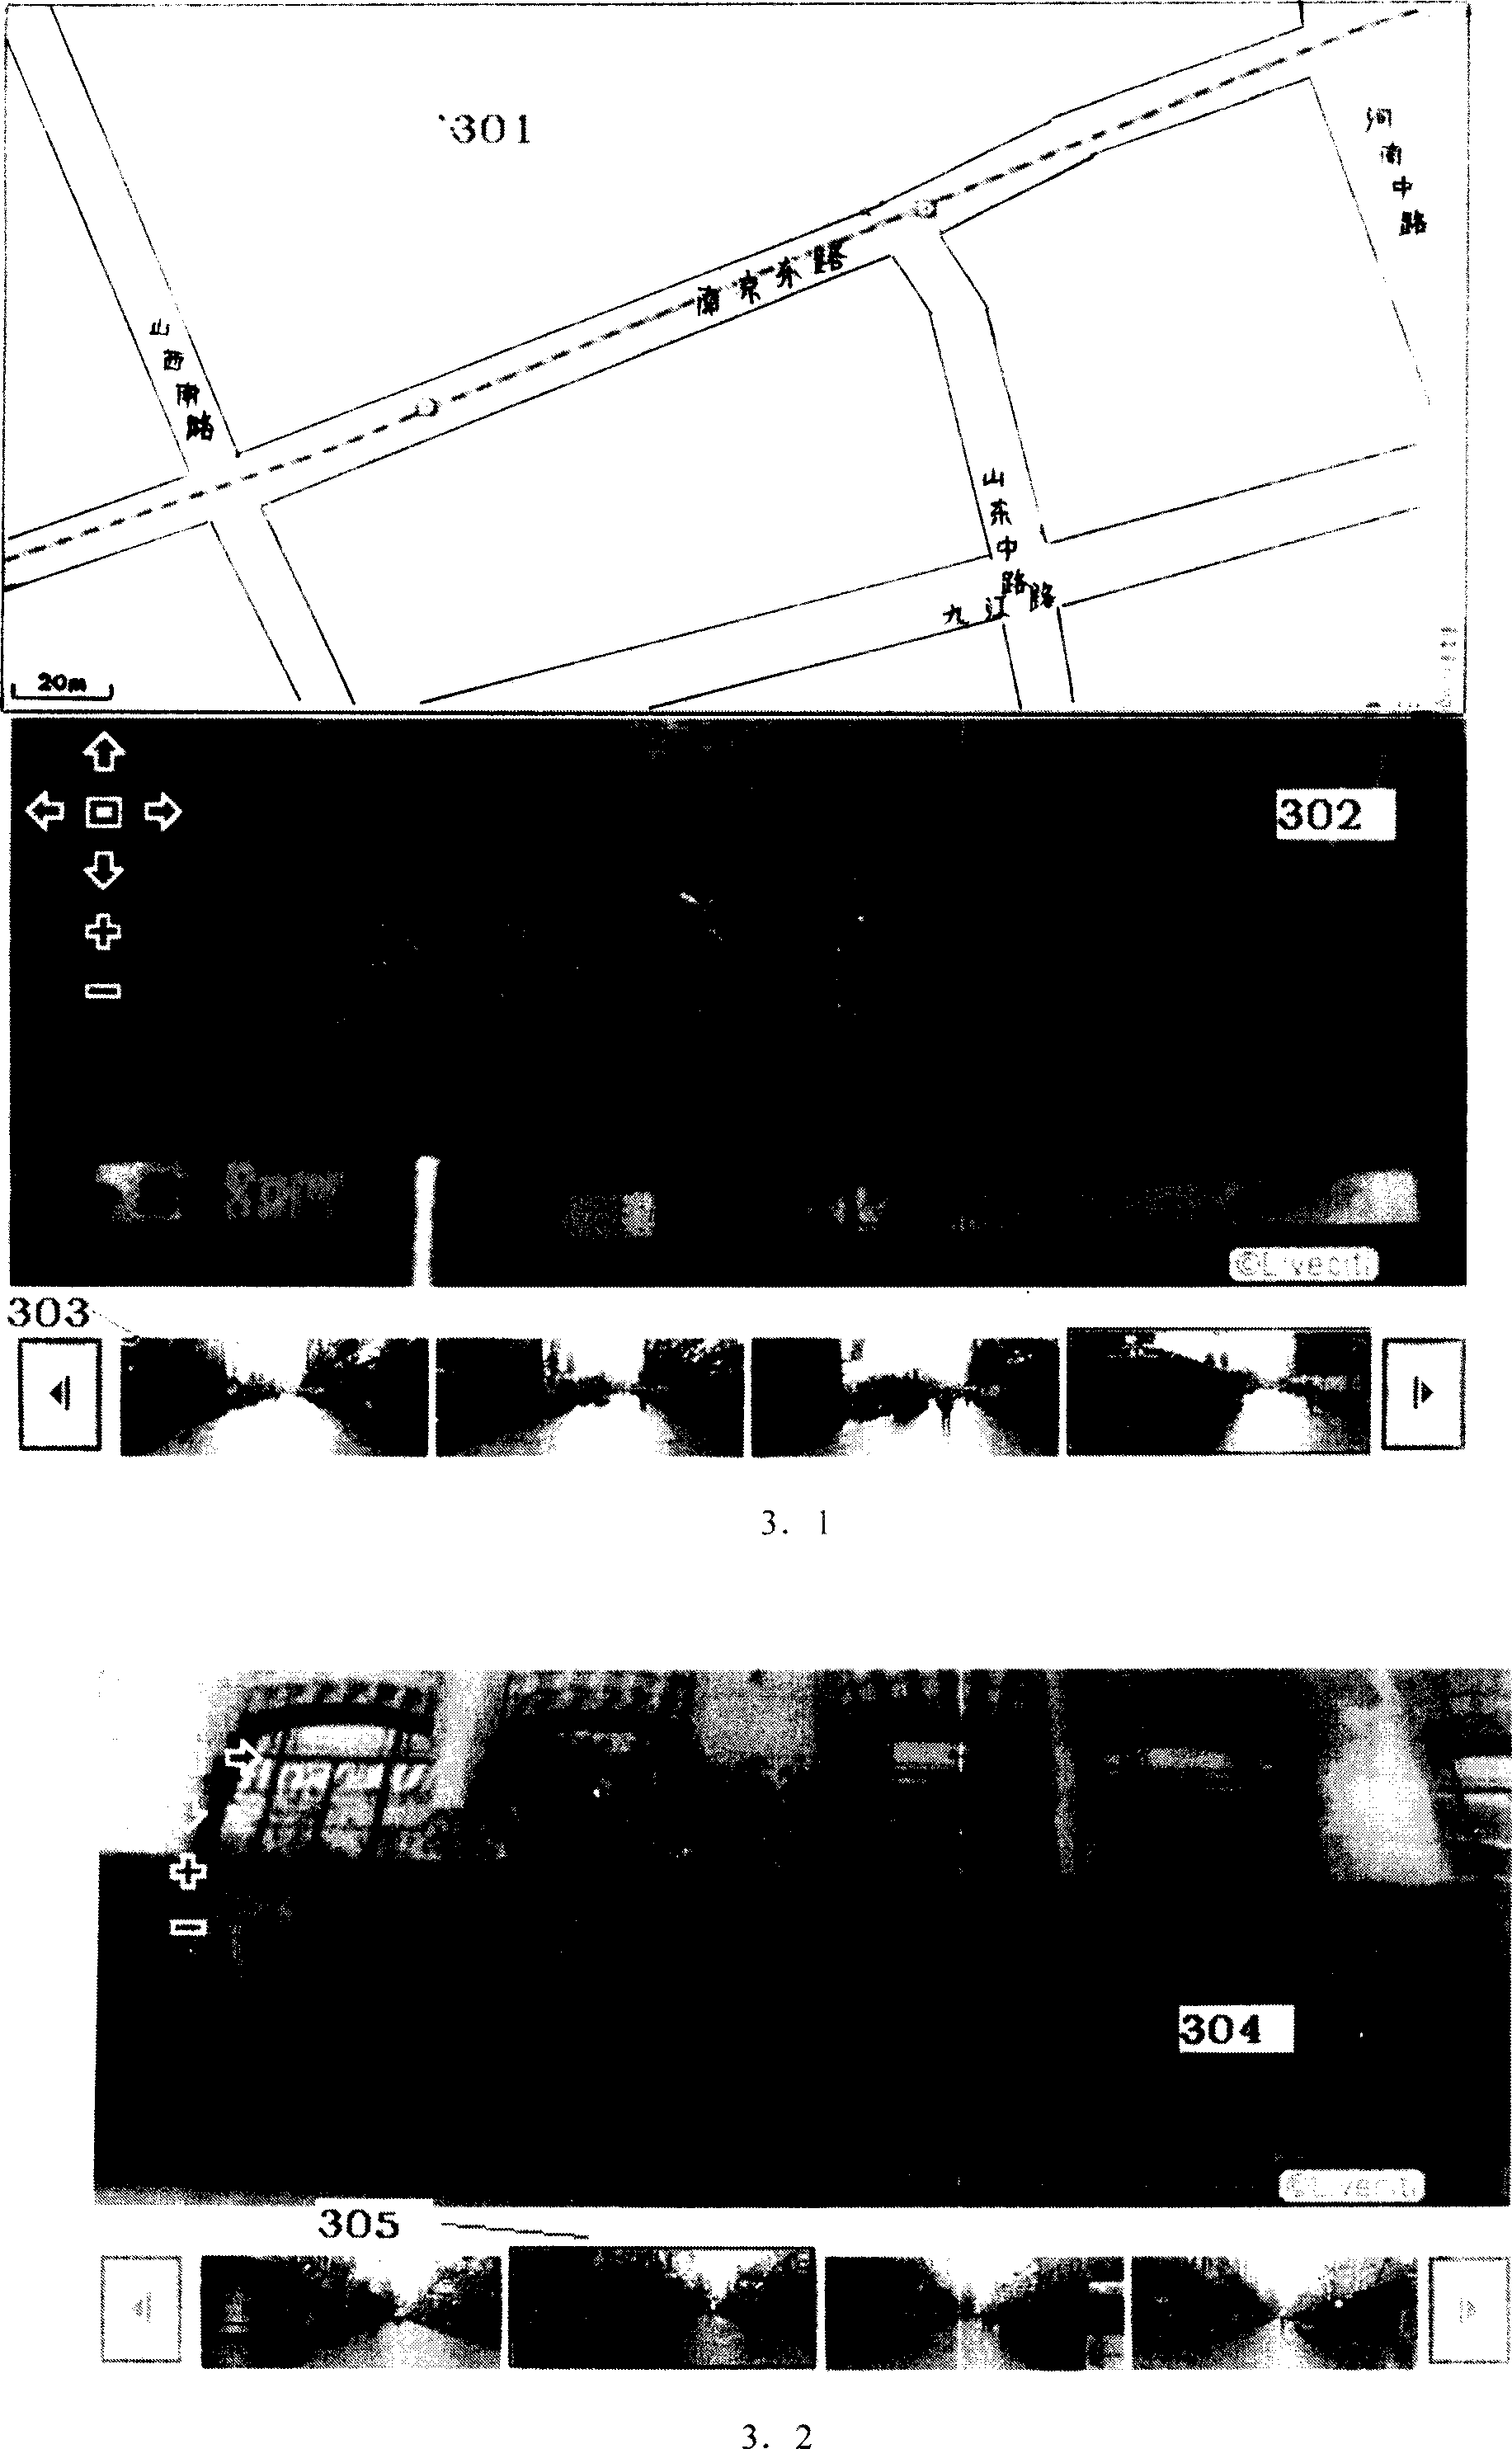 Method for annotating electronic map through photograph collection having position information